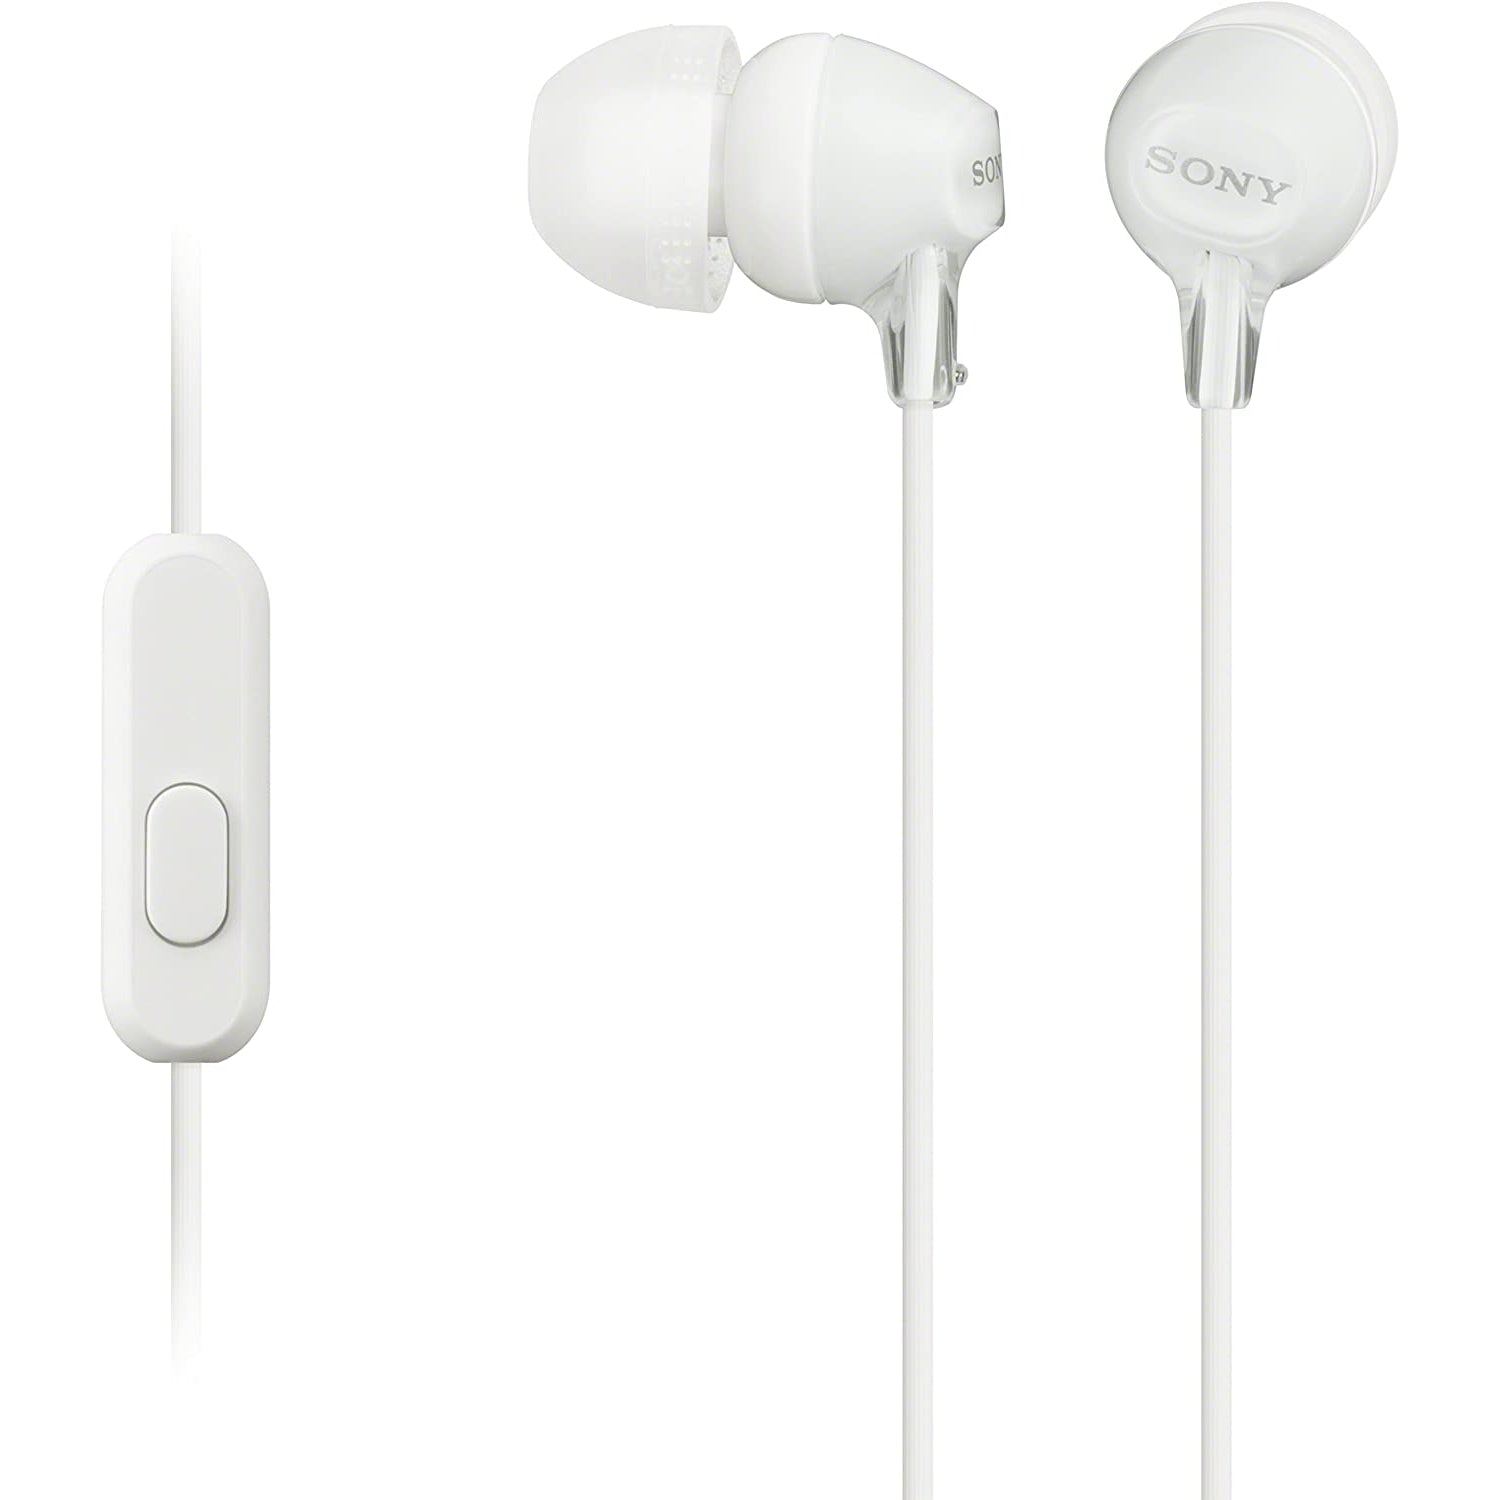 Sony MDR-EX15AP In-Ear Headphones with Mic/Remote - White - Refurbished Excellent